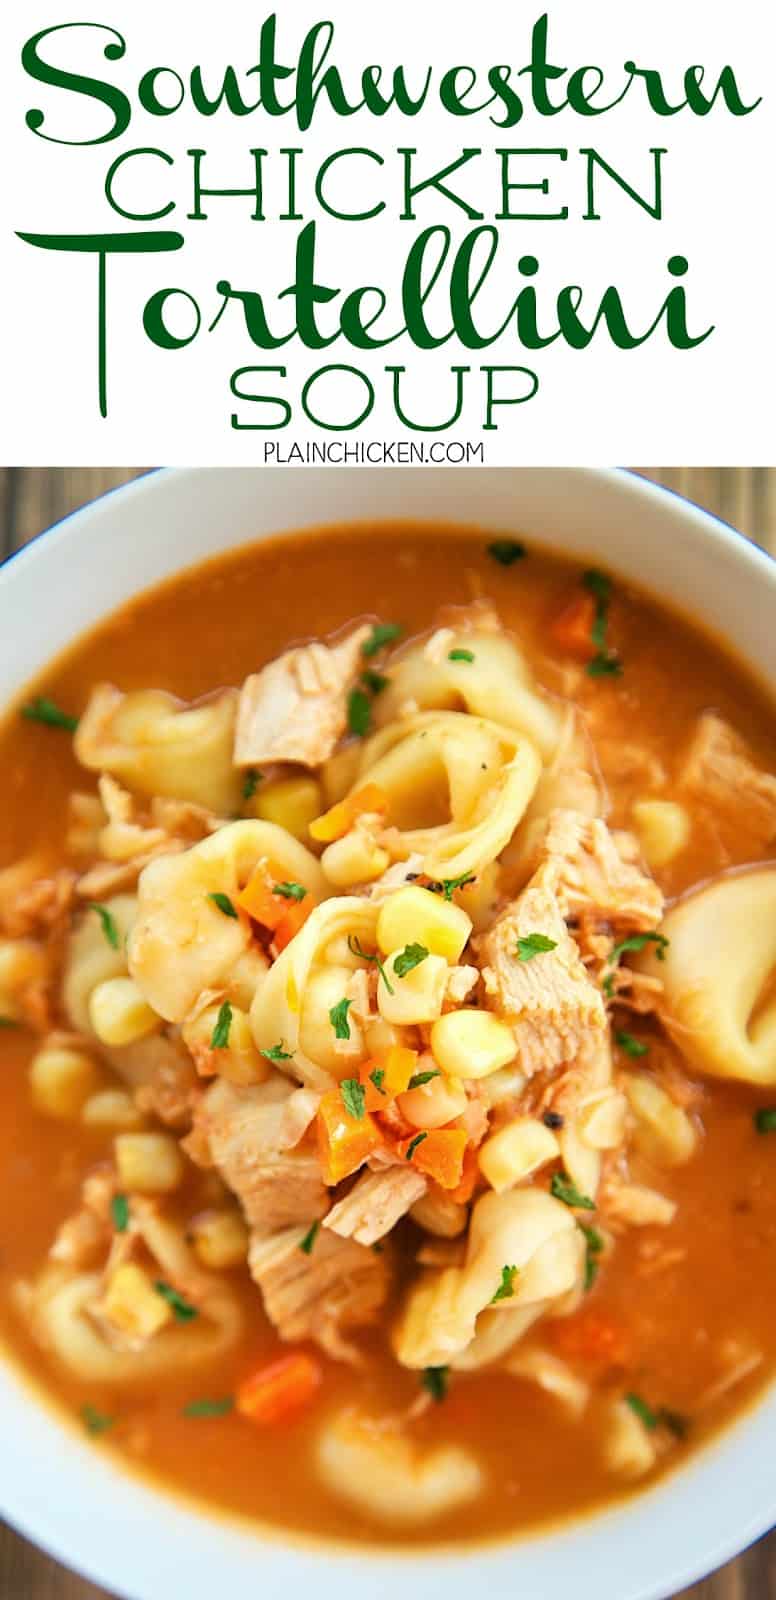 Southwestern Chicken Tortellini Soup - ready in under 30 minutes!! Chicken broth, salsa, carrots, corn, onion, frozen cheese tortellini and evaporated milk. Very hearty soup. Great weeknight meal. Everyone loved this! We ate it for dinner and reheated for lunch the next day. Delicious!